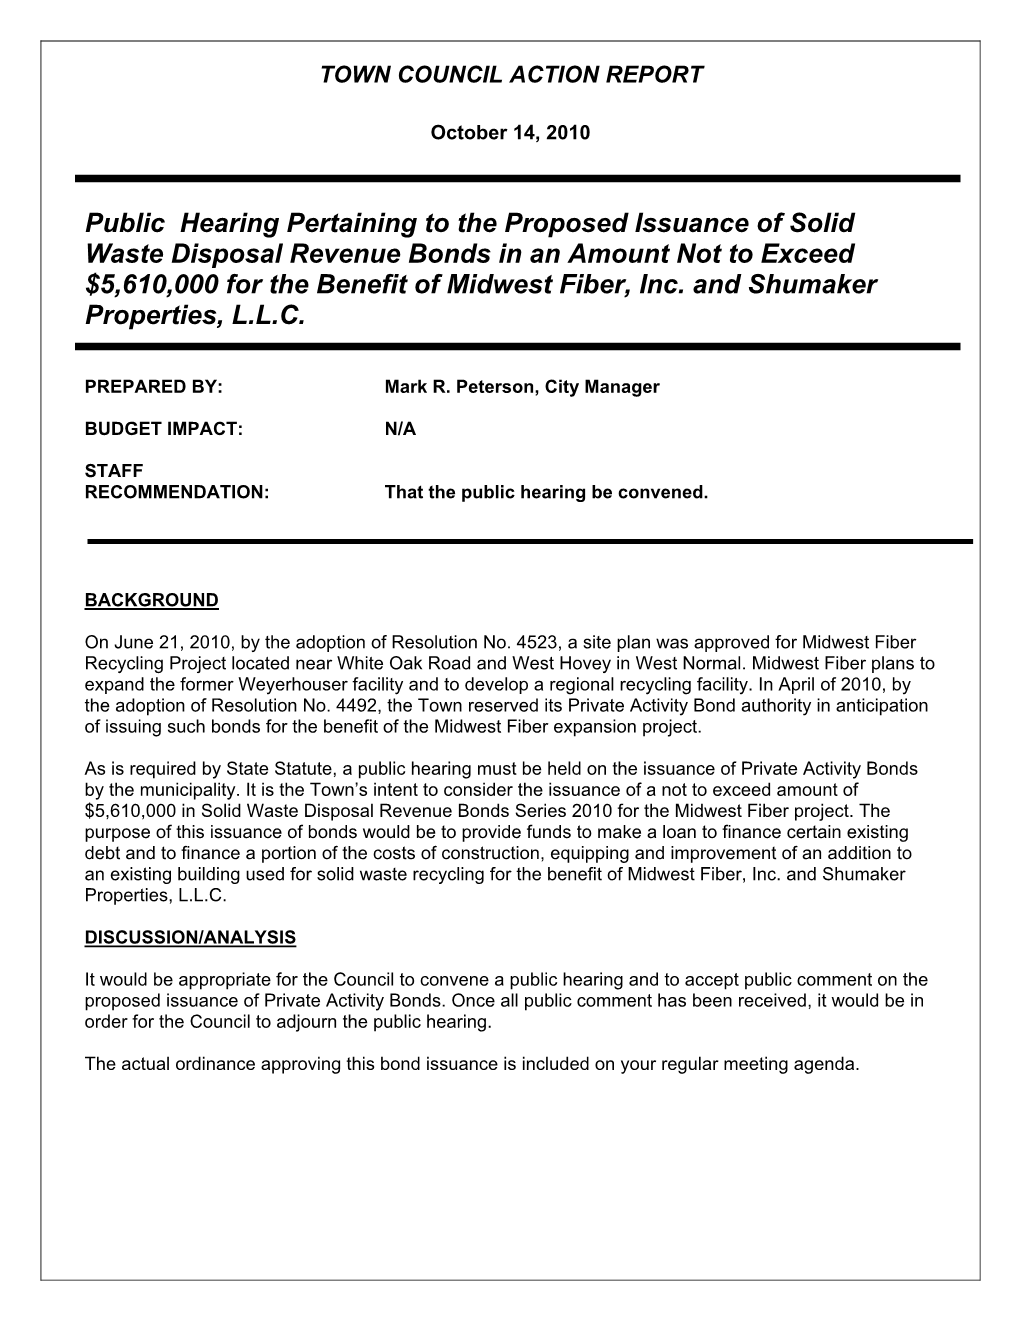 Public Hearing Pertaining to the Proposed Issuance of Solid Waste Disposal Revenue Bonds in an Amount Not to Exceed $5,610,000 for the Benefit of Midwest Fiber, Inc